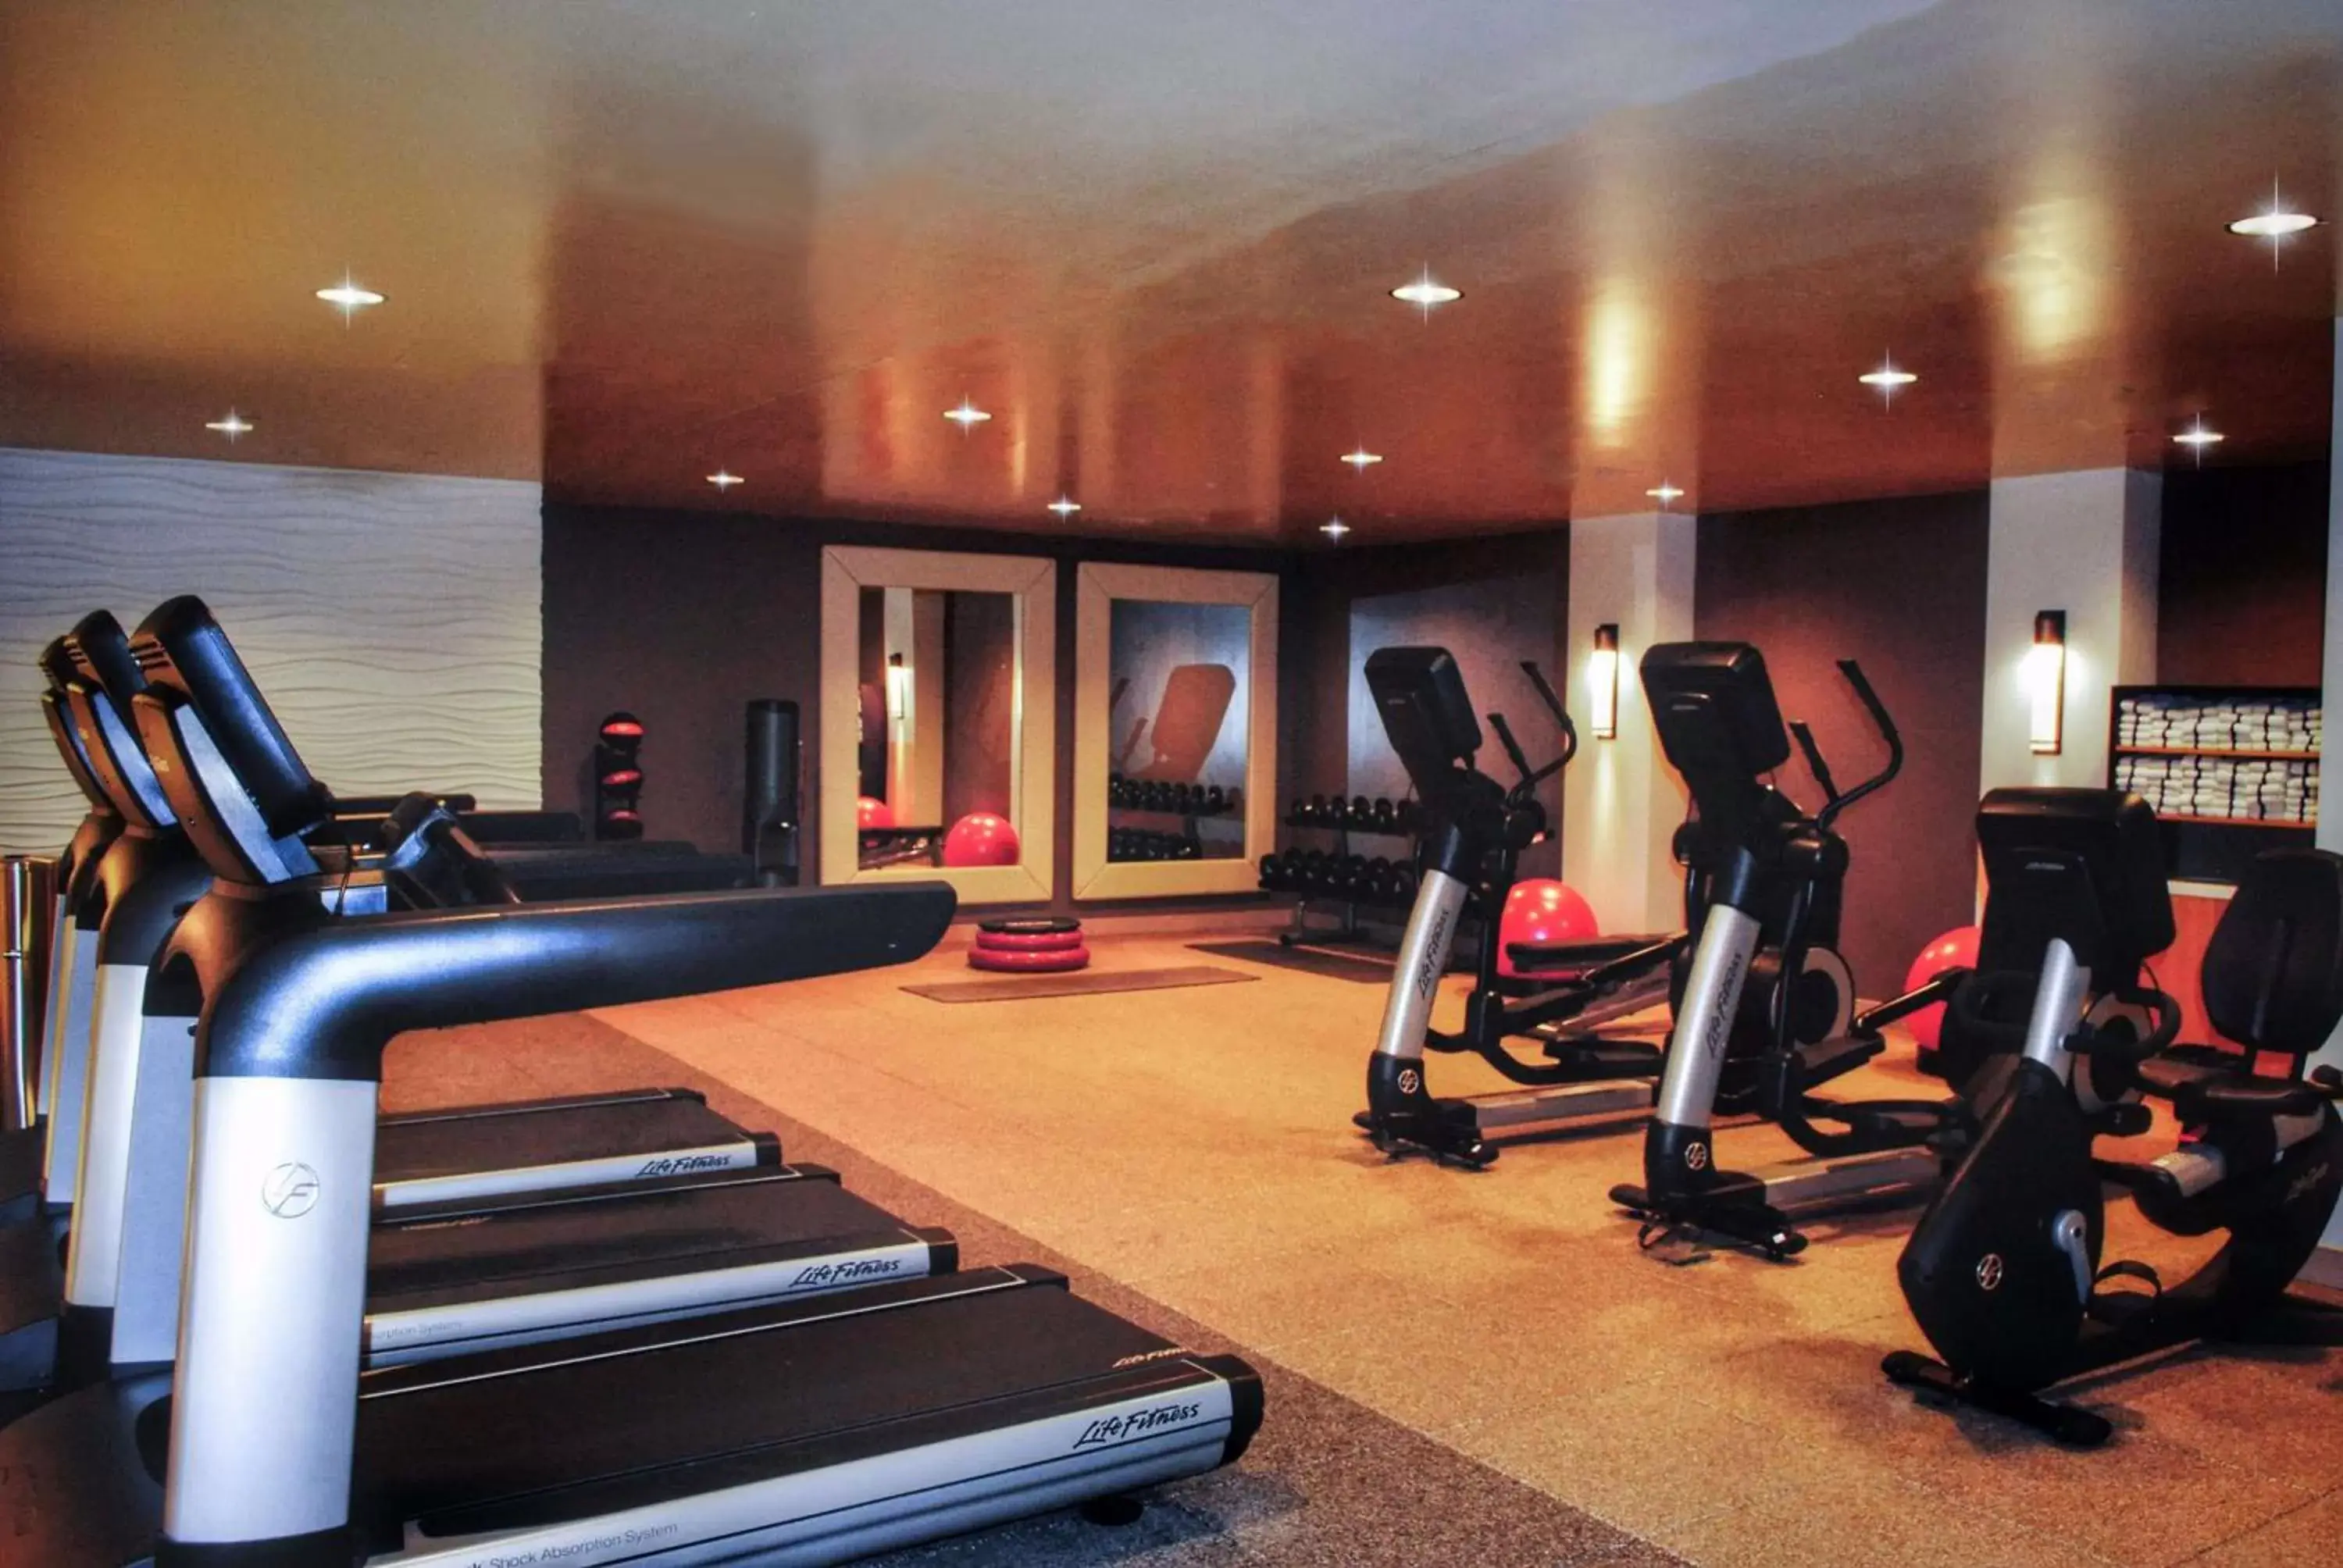 Fitness centre/facilities, Fitness Center/Facilities in DoubleTree by Hilton Hotel Reading